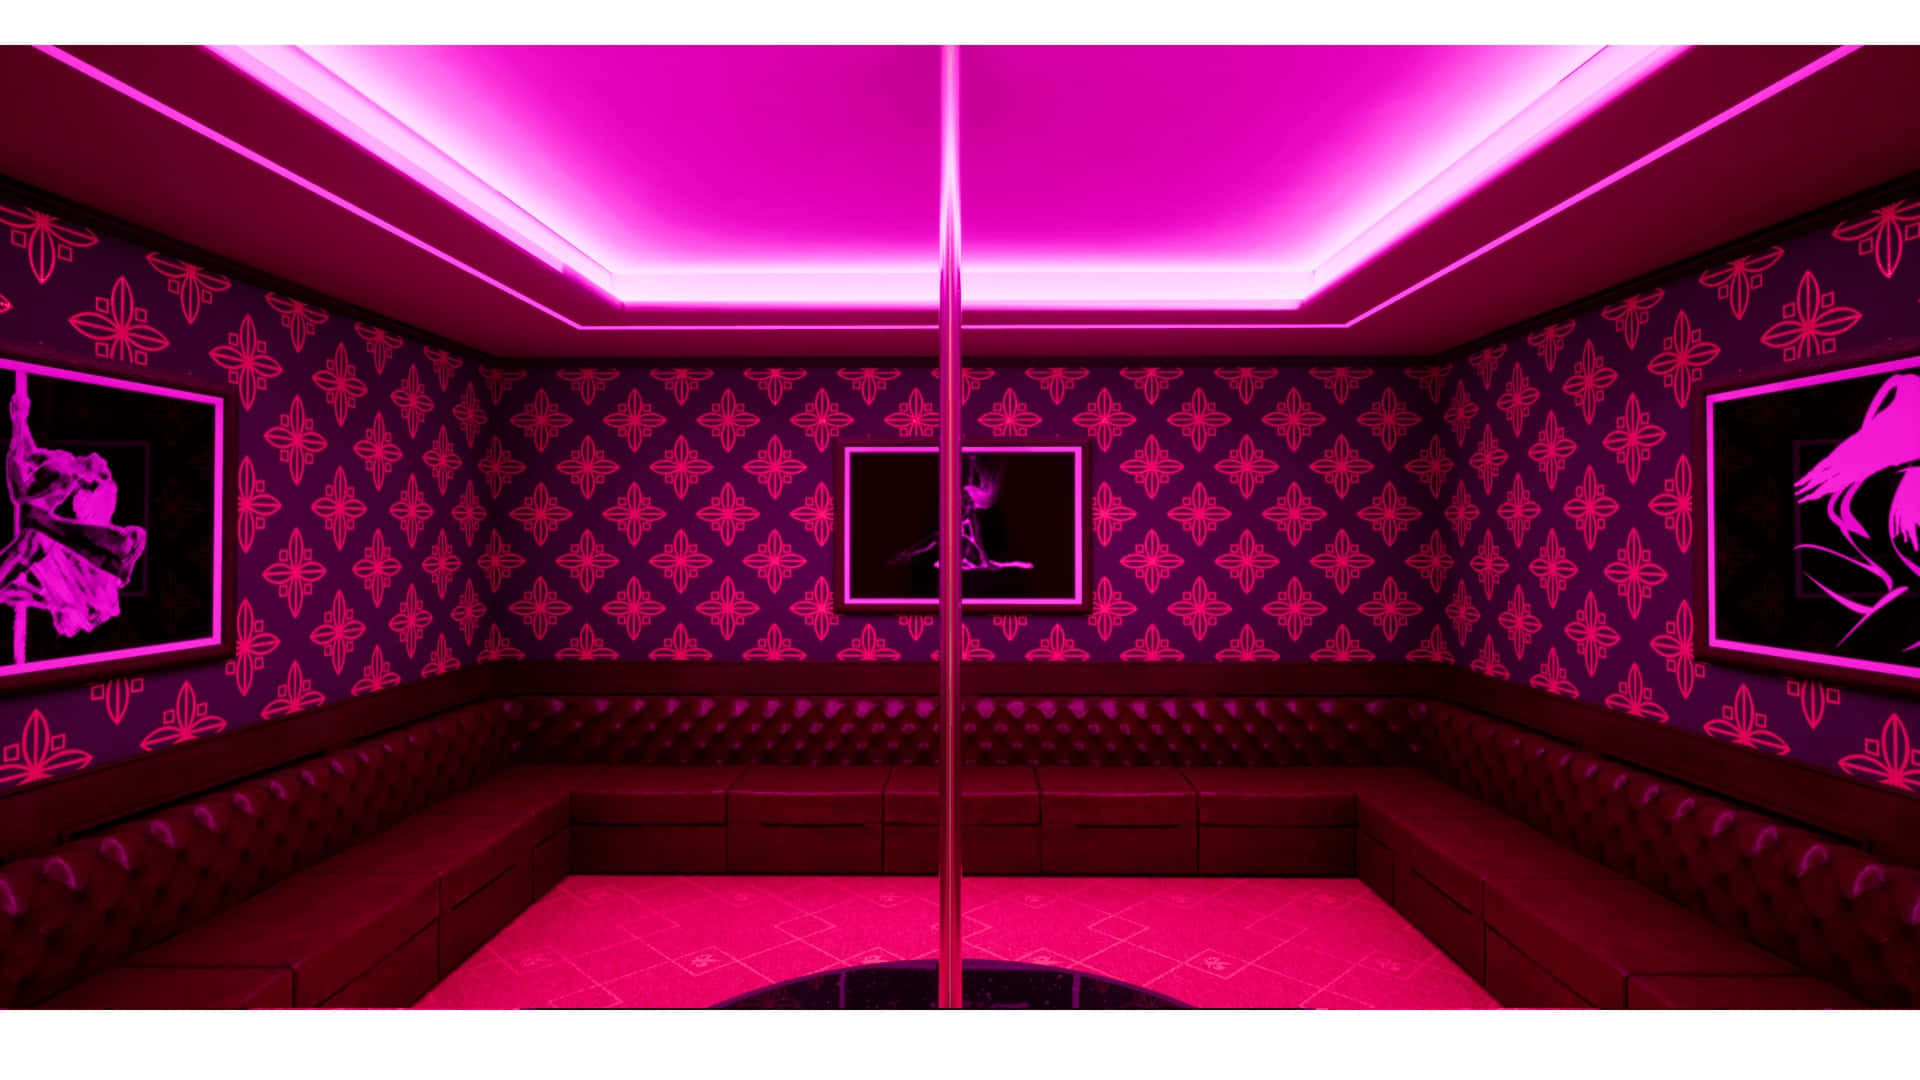 A Room With Pink Lights And A Pink Wall